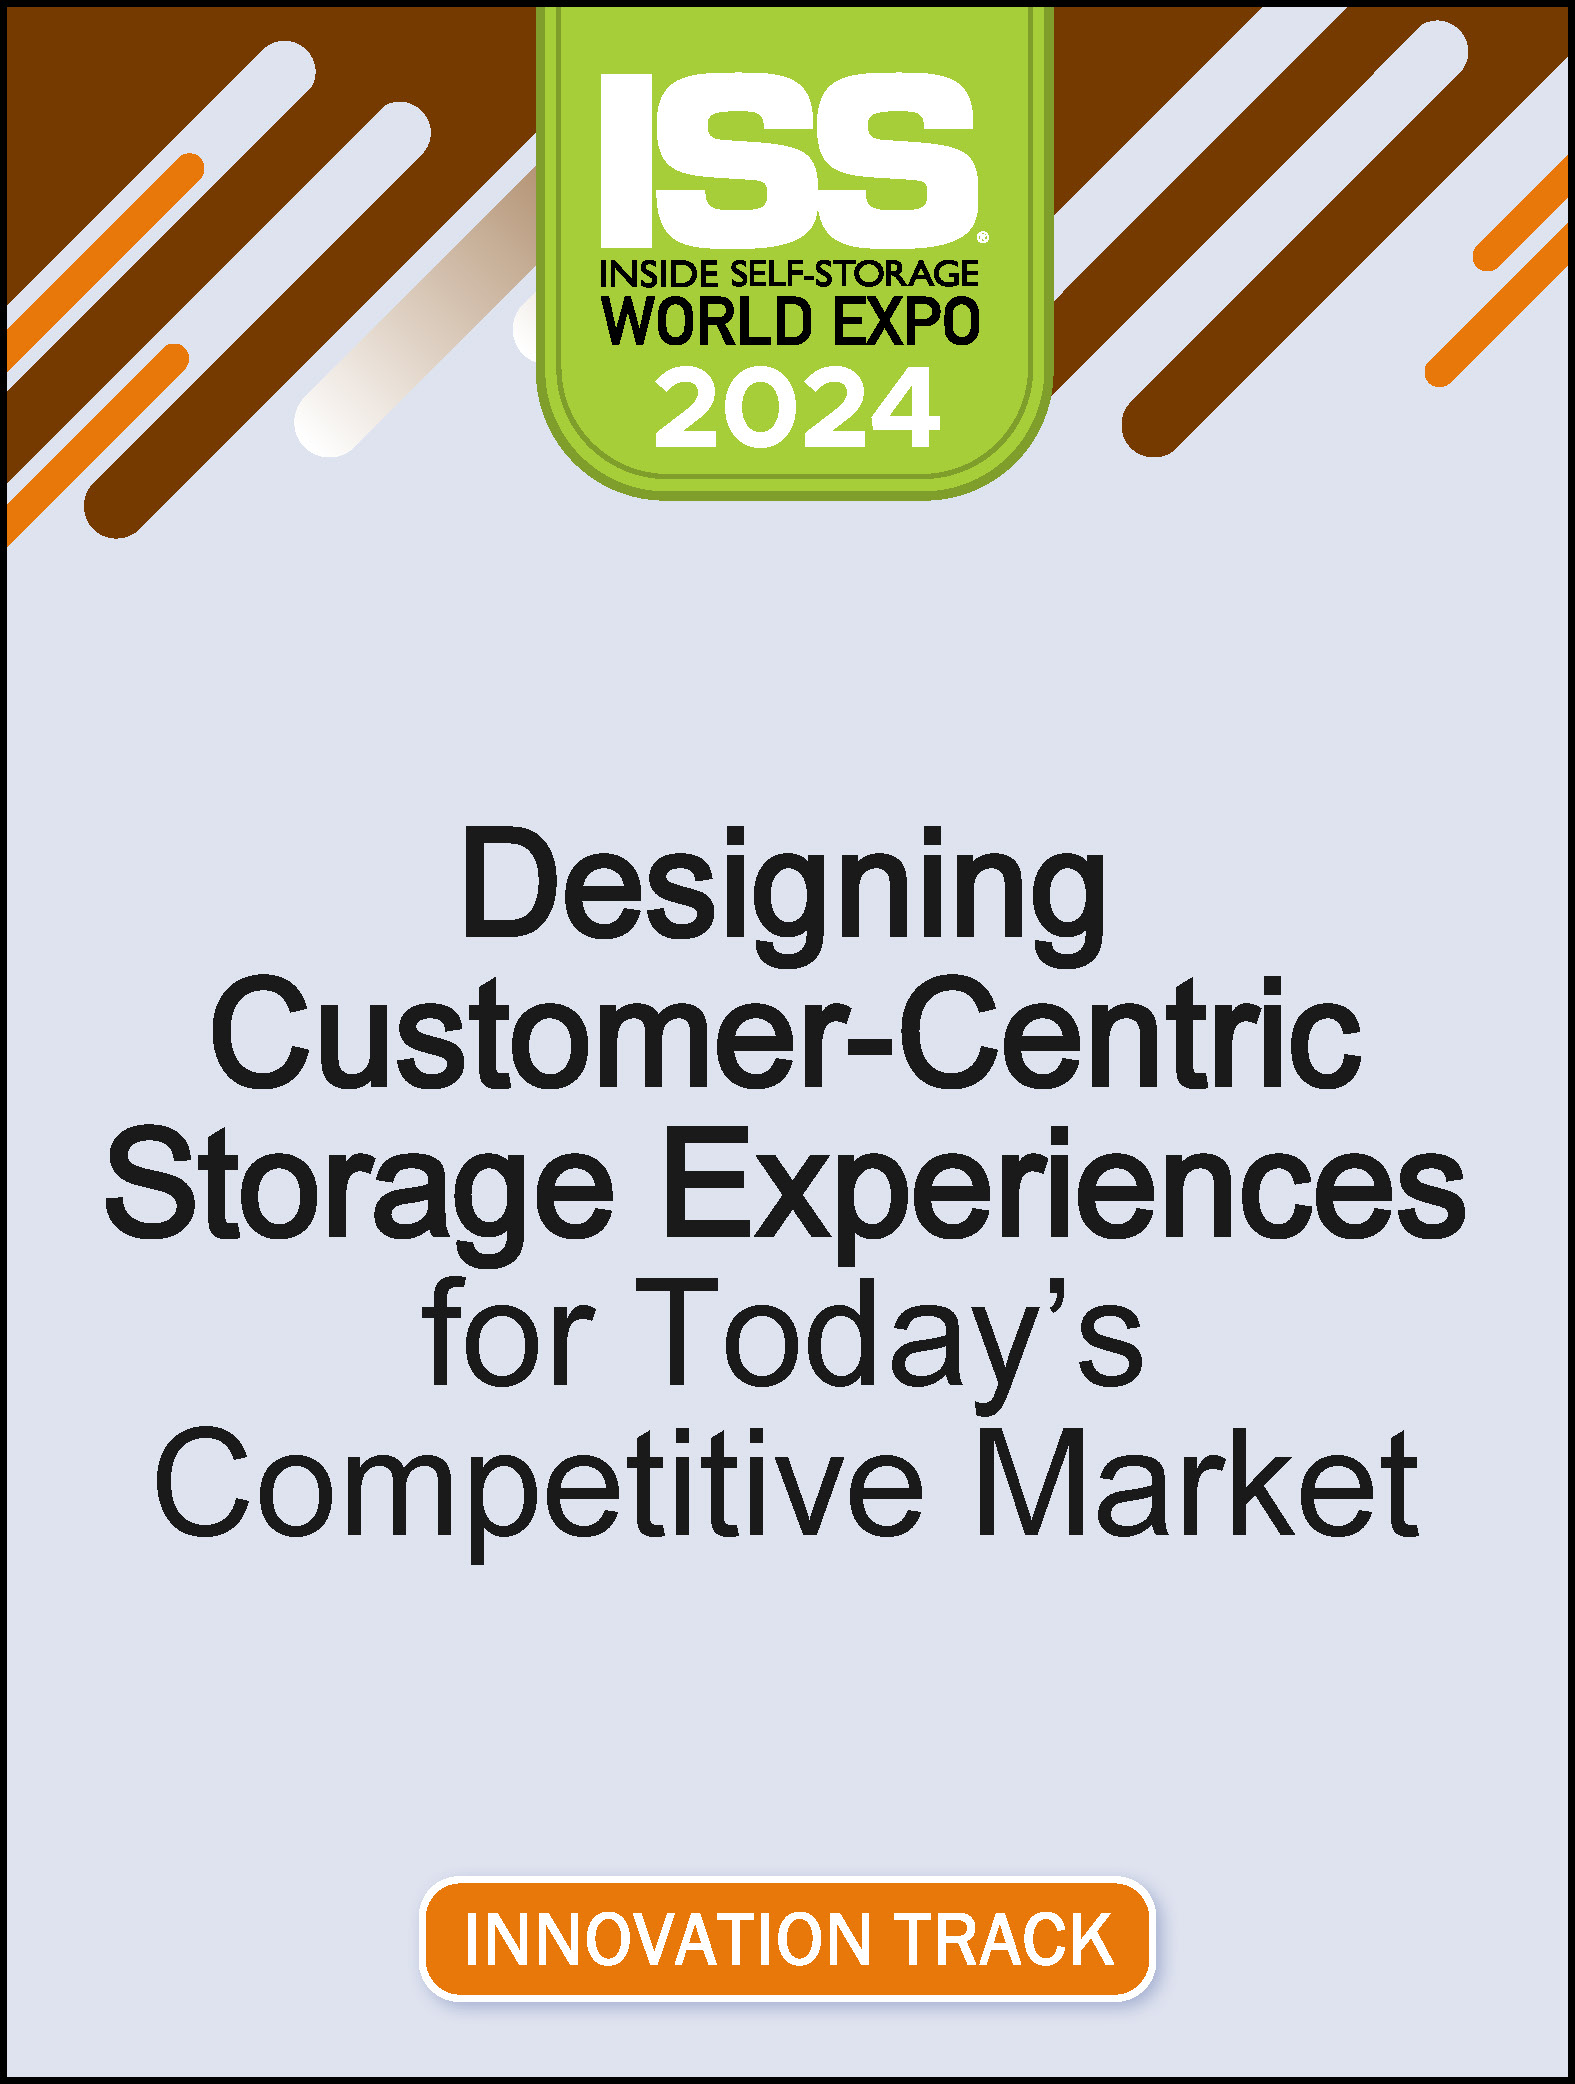 Video Pre-Order - Designing Customer-Centric Self-Storage Experiences for Today’s Competitive Market